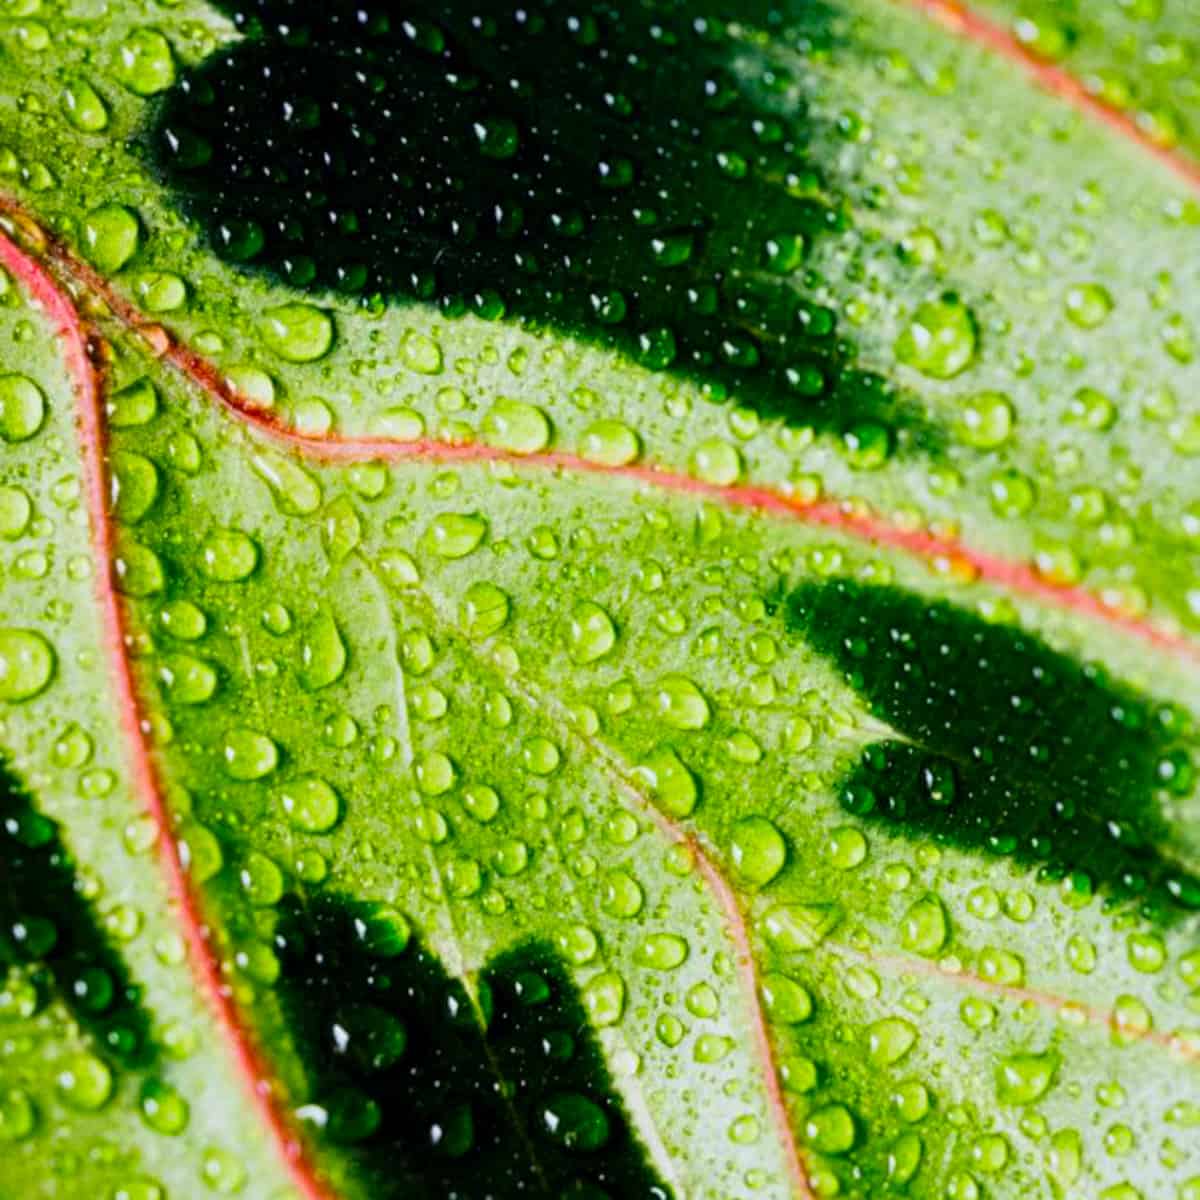 olive leaf up close with water beads